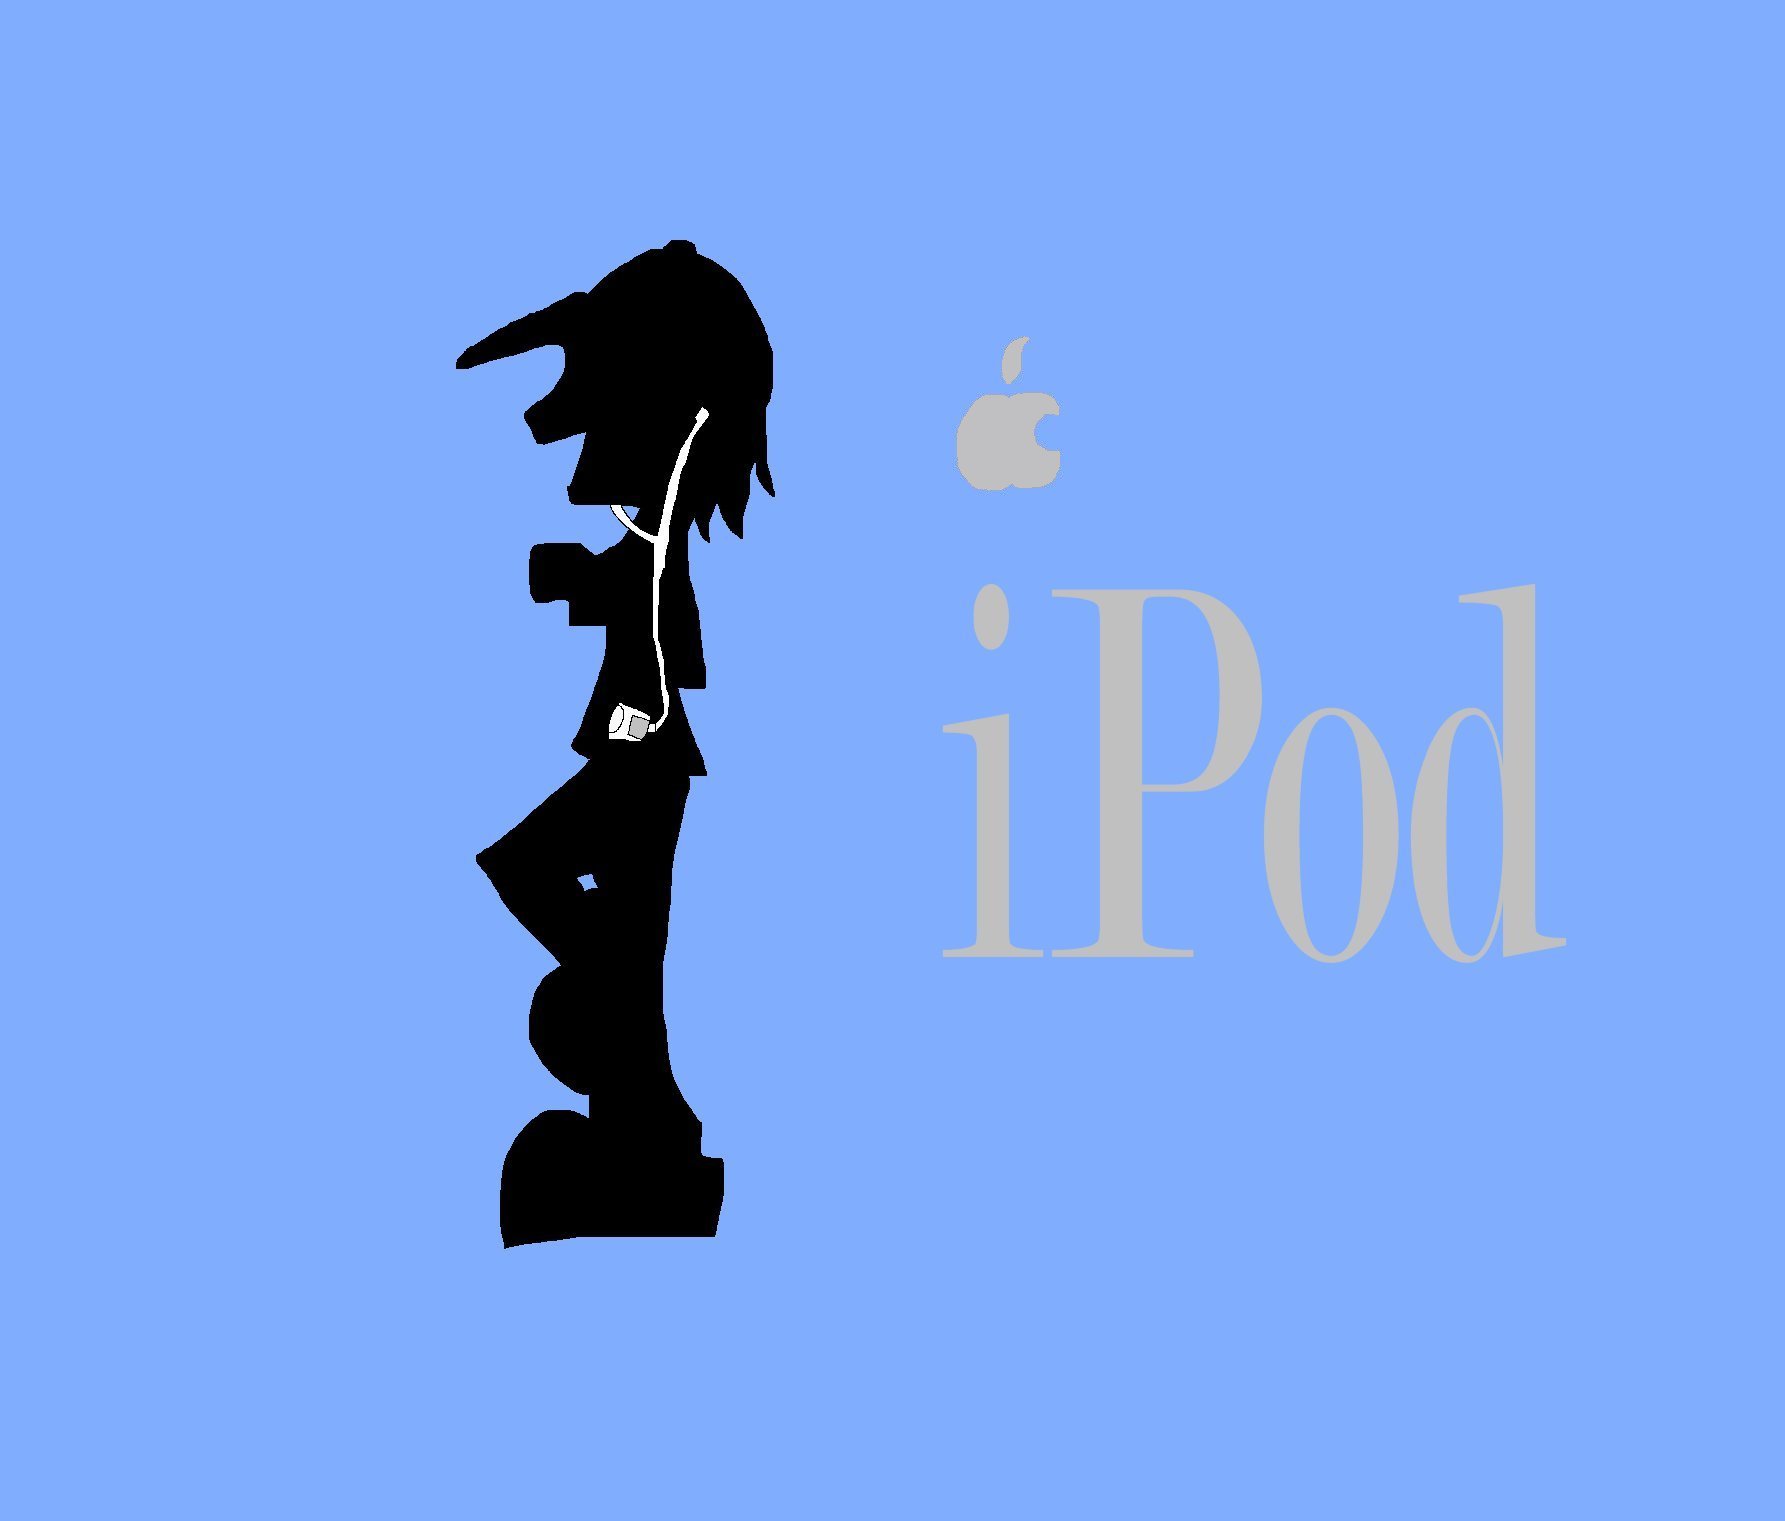 ipod series 3 by CrAzY_fish101